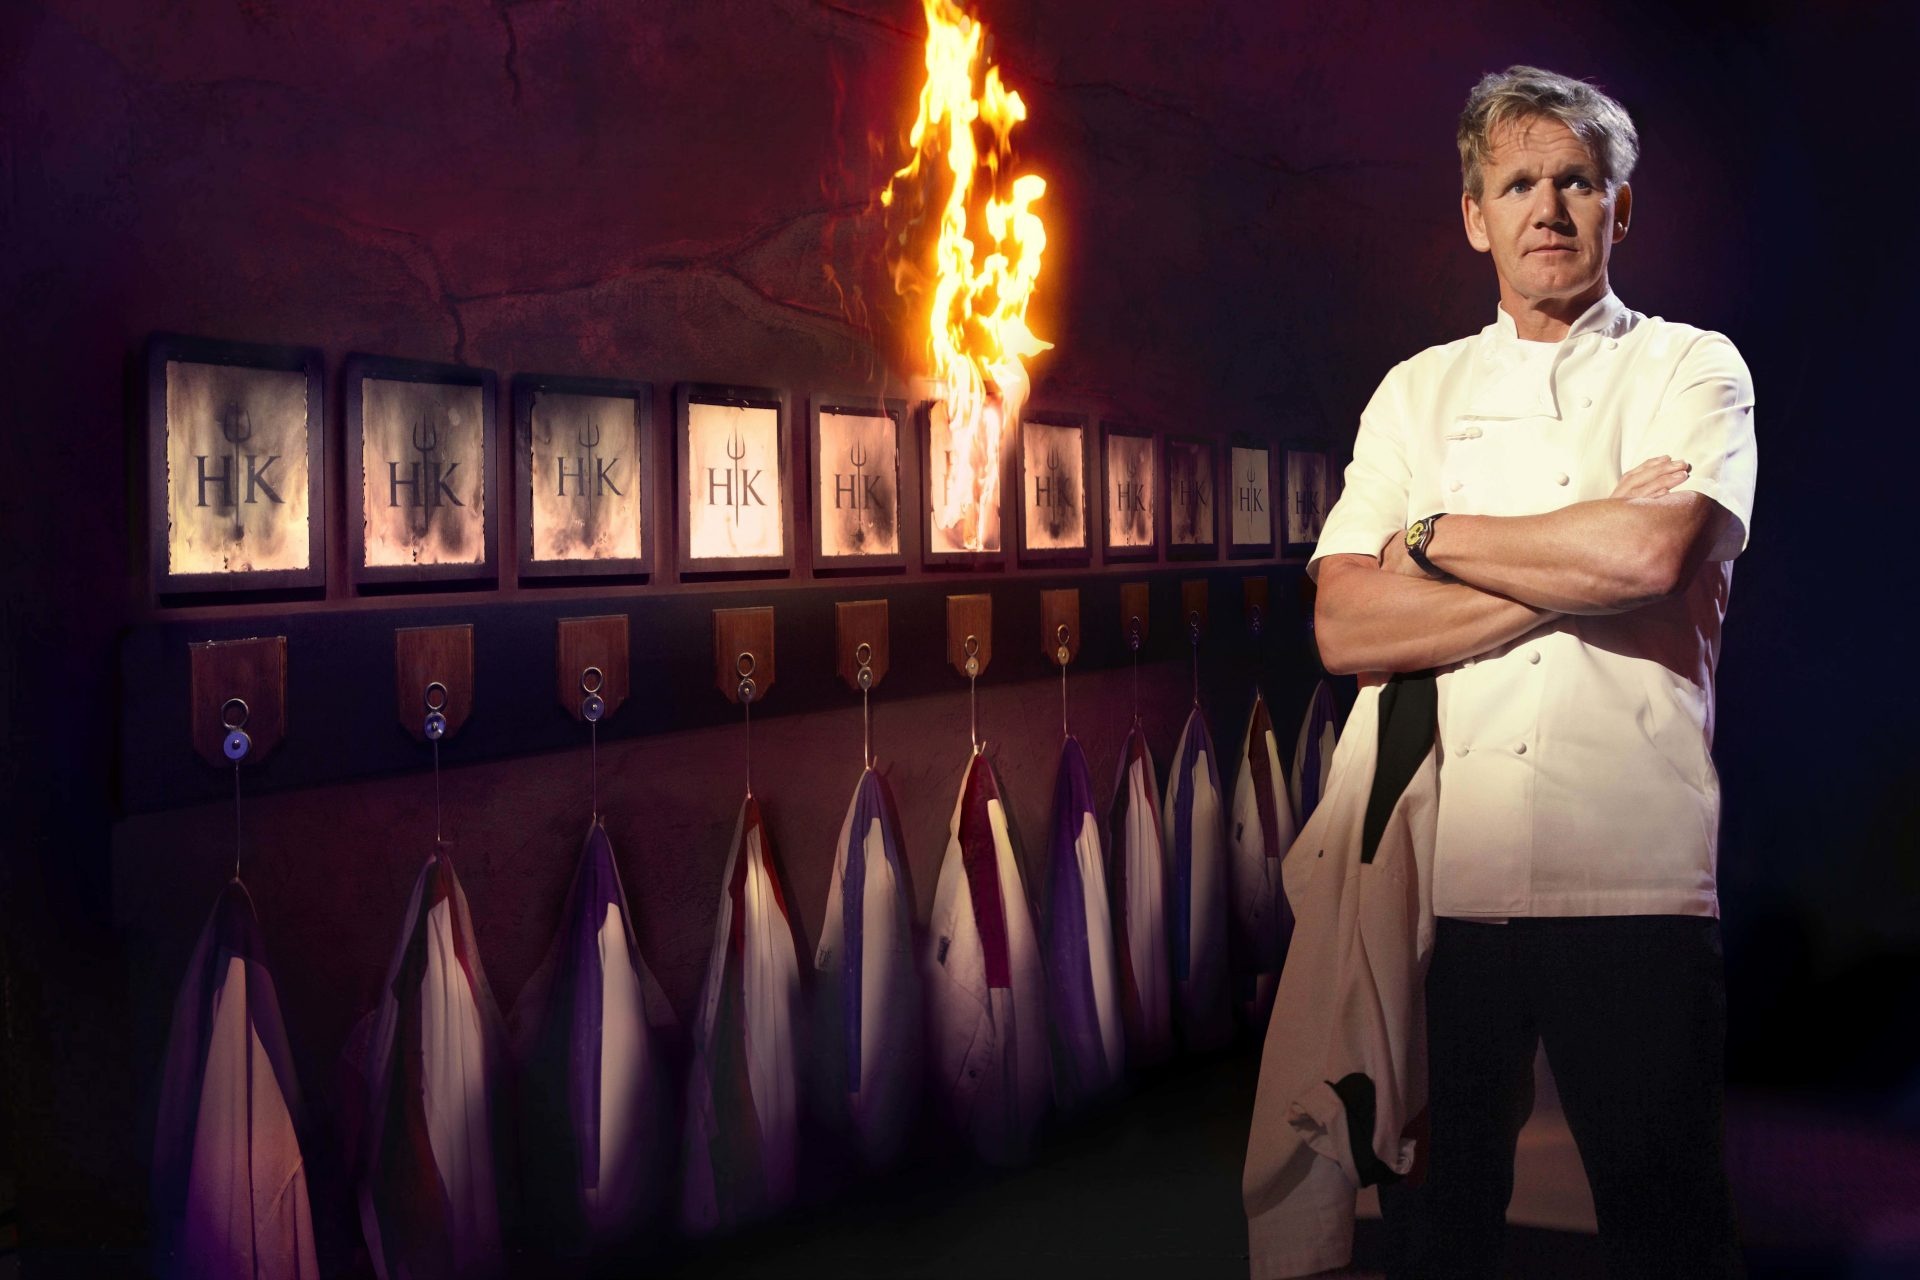 Gordon Ramsay: A head chef in the British series about competitive cookery and food Hell's Kitchen. 1920x1280 HD Wallpaper.